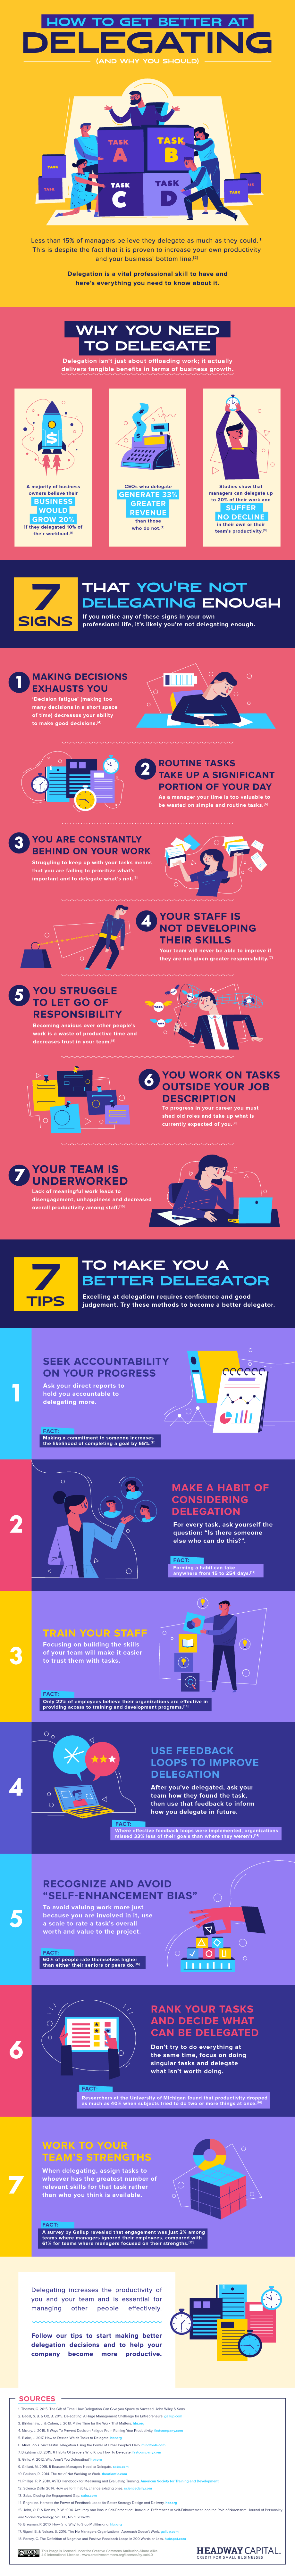 How-to-get-better-at-delegating_infographic-2 "width =" 920 "style =" width: 920px; "srcset =" https://blog.hubspot.com/hs-fs/hubfs/How-to- get-better-at-delegating_infographic-2.png? width = 460 & name = How-to-better-at-delegating_infographic-2.png 460w, https://blog.hubspot.com/hs-fs/hubfs/How -to-get-better-at-delegating_infographic-2.png? larghezza = 920 e nome = Come-migliorare-at-delegating_infographic-2.png 920w, https://blog.hubspot.com/hs-fs/ hubfs / How-to-get-better-at-delegating_infographic-2.png? width = 1380 & name = How-to-better-at-delegating_infographic-2.png 1380w, https://blog.hubspot.com/hs -fs / hubfs / How-to-better-at-delegating_infographic-2.png? width = 1840 & name = How-to-better-at-delegating_infographic-2.png 1840w, https: //blog.hubspot. com / hs-fs / hubfs / How-to-get-better-at-delegating_infographic-2.png? width = 2300 & name = How-to-best-at-delegating_infographic-2.png 2300w, https: // blog .hubspot.com / HS-fs / hubfs / How-to-get-at-meglio-delegating_infographic-2.png? width = 2760 & name = How-to-get-b etter-at-delegating_infographic-2.png 2760w "dimensioni =" (larghezza massima: 920px) 100vw, 920px